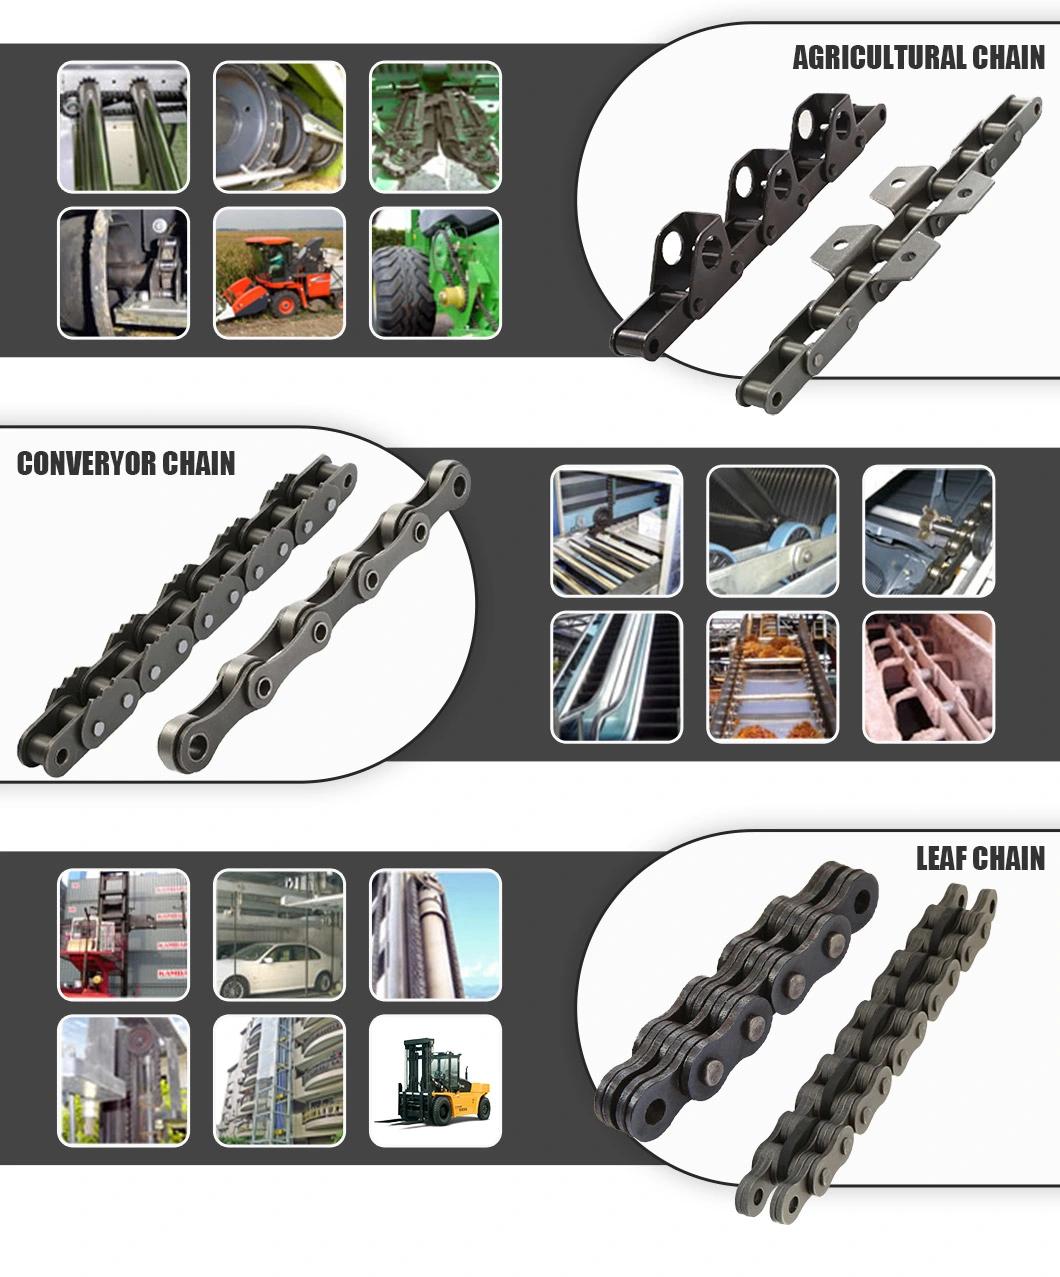 Free Sample Agricultural Chain (Corn Harvest Chain)